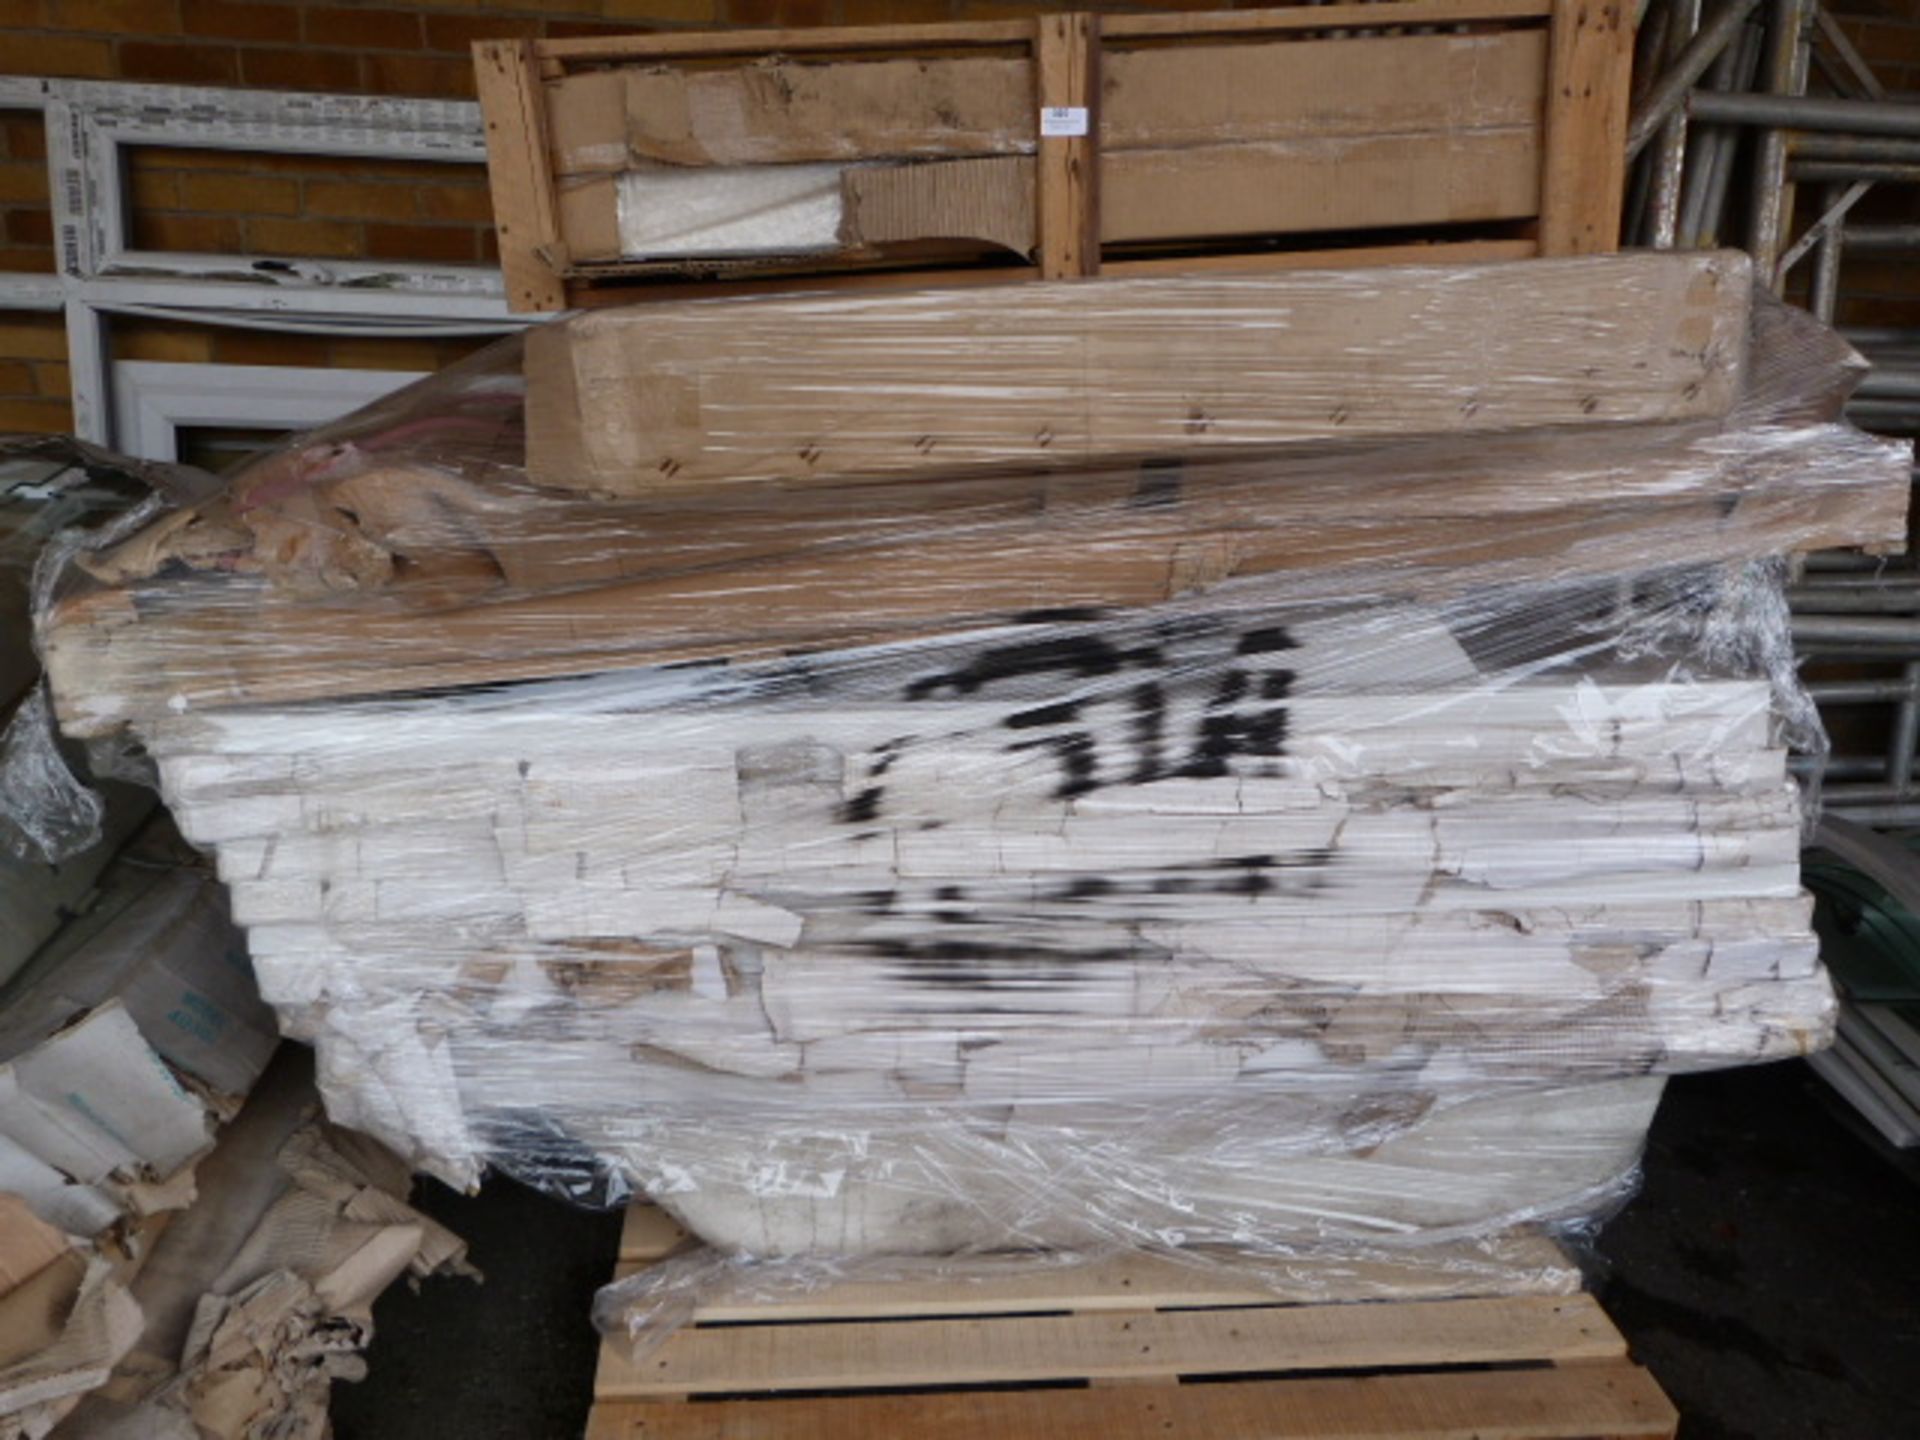 Pallet Containing Ten White Acrylic Baths, Shower Trays, etc.